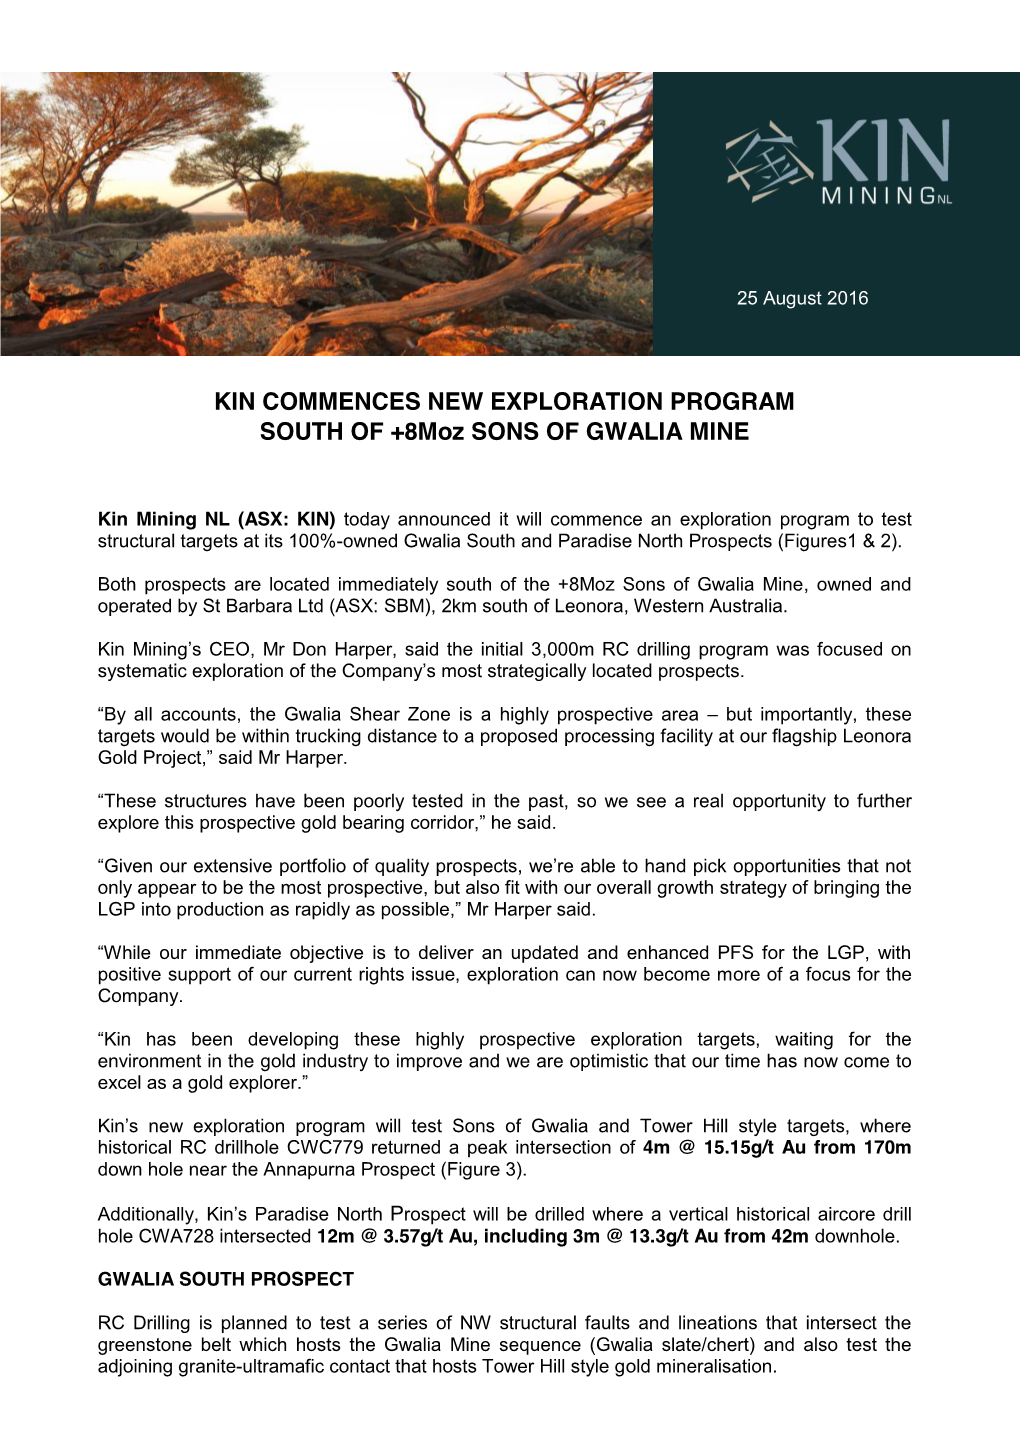 Kin to Drill South of 8Moz Sons of Gwalia Mine